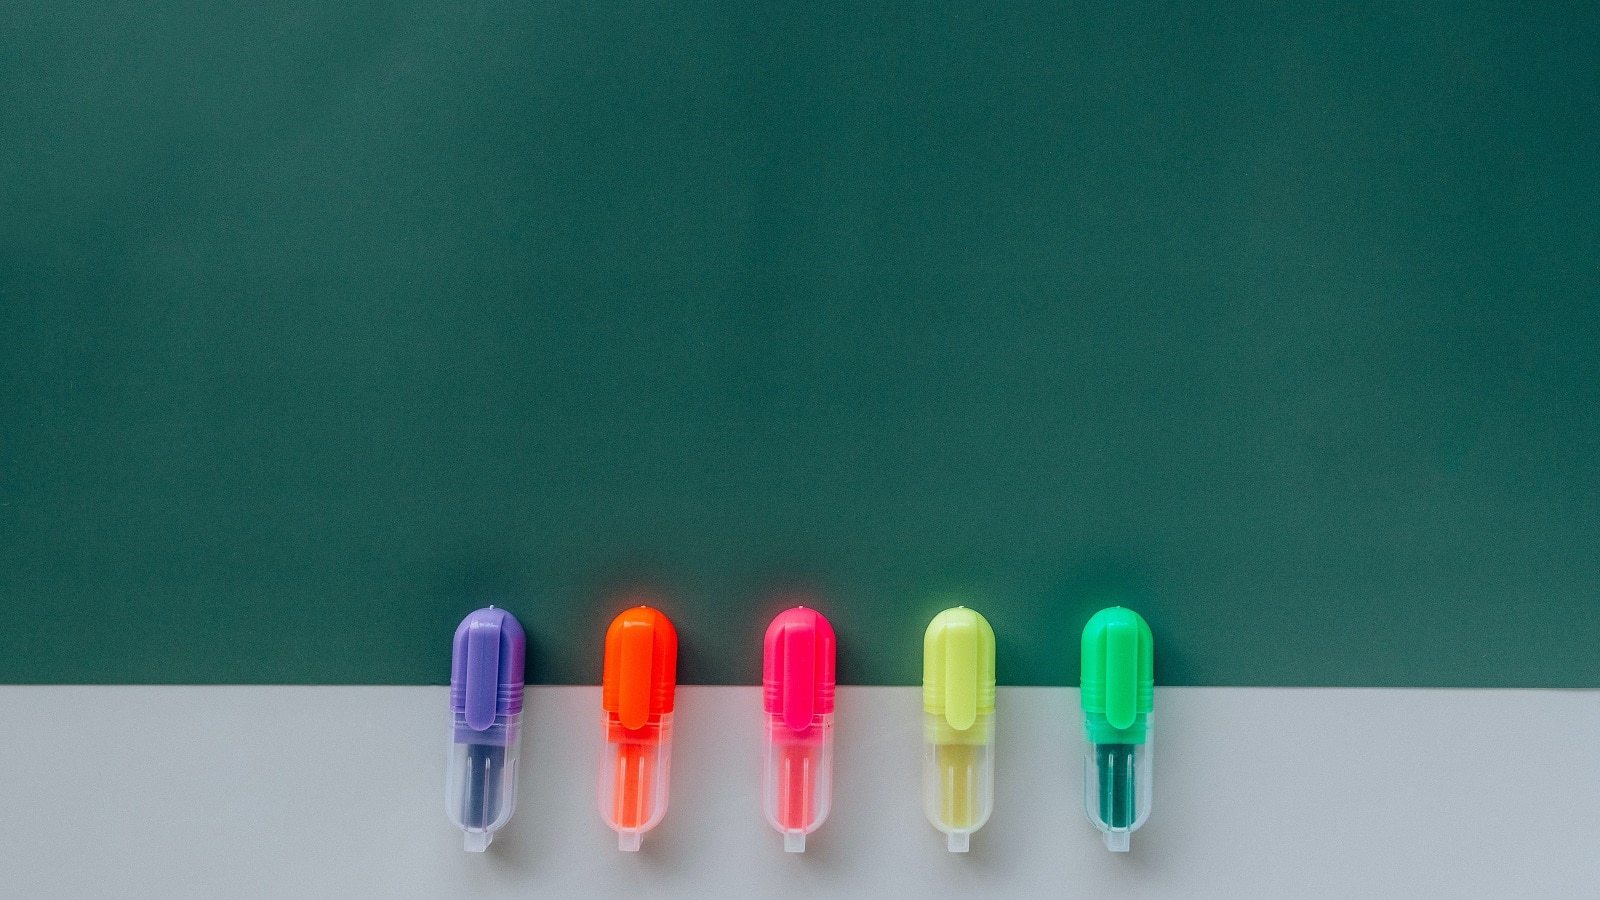 Highlighters in a row on a dark green background